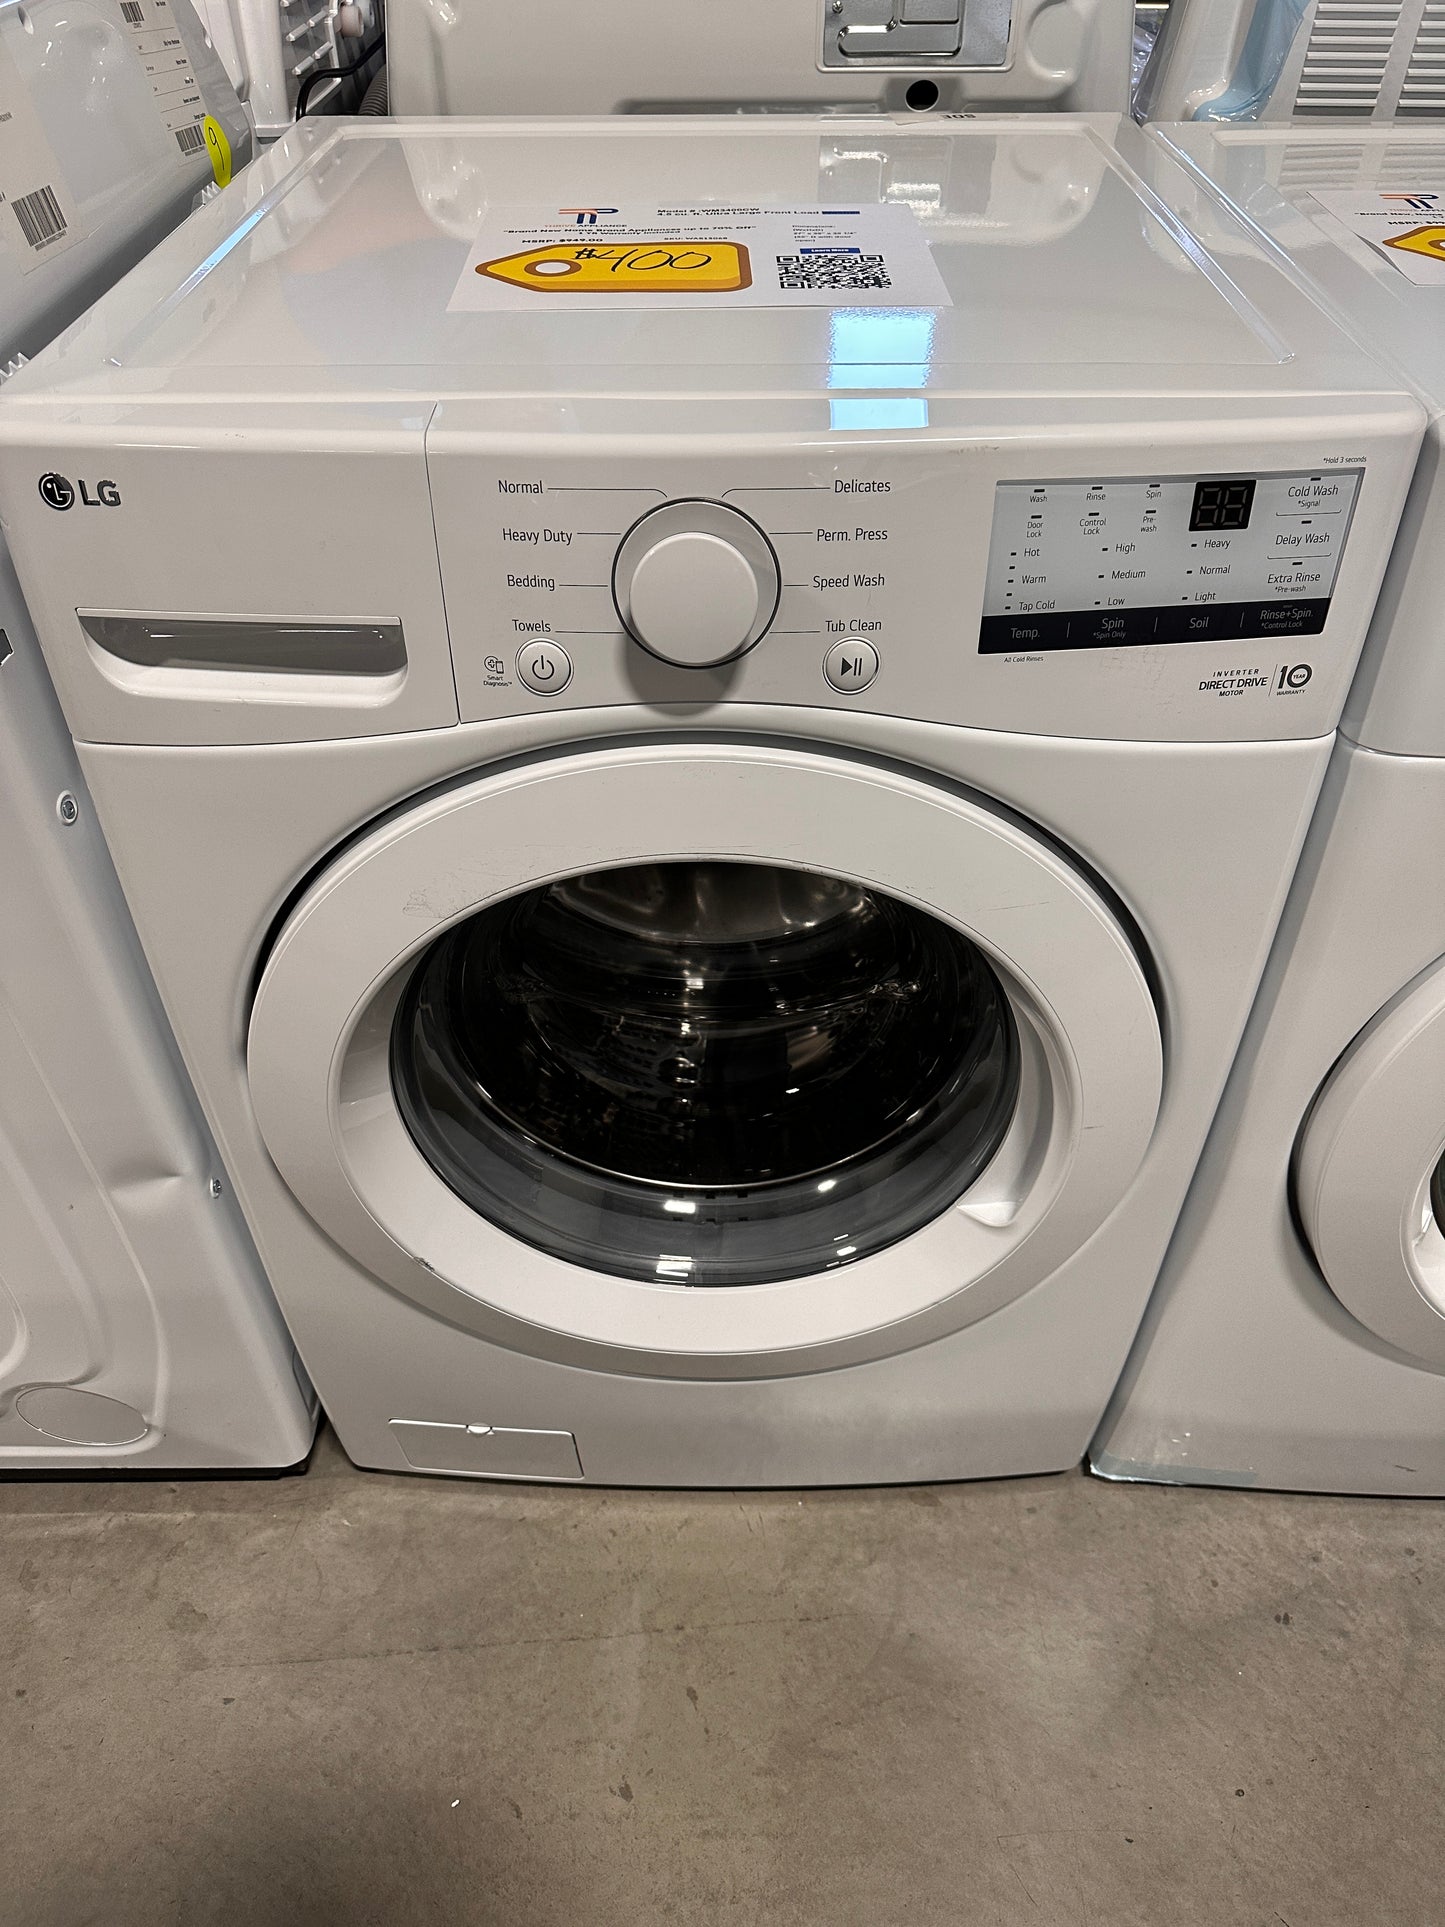 Front-Load Washer with 6Motion Technology - White  Model:WM3400CW  WAS13068